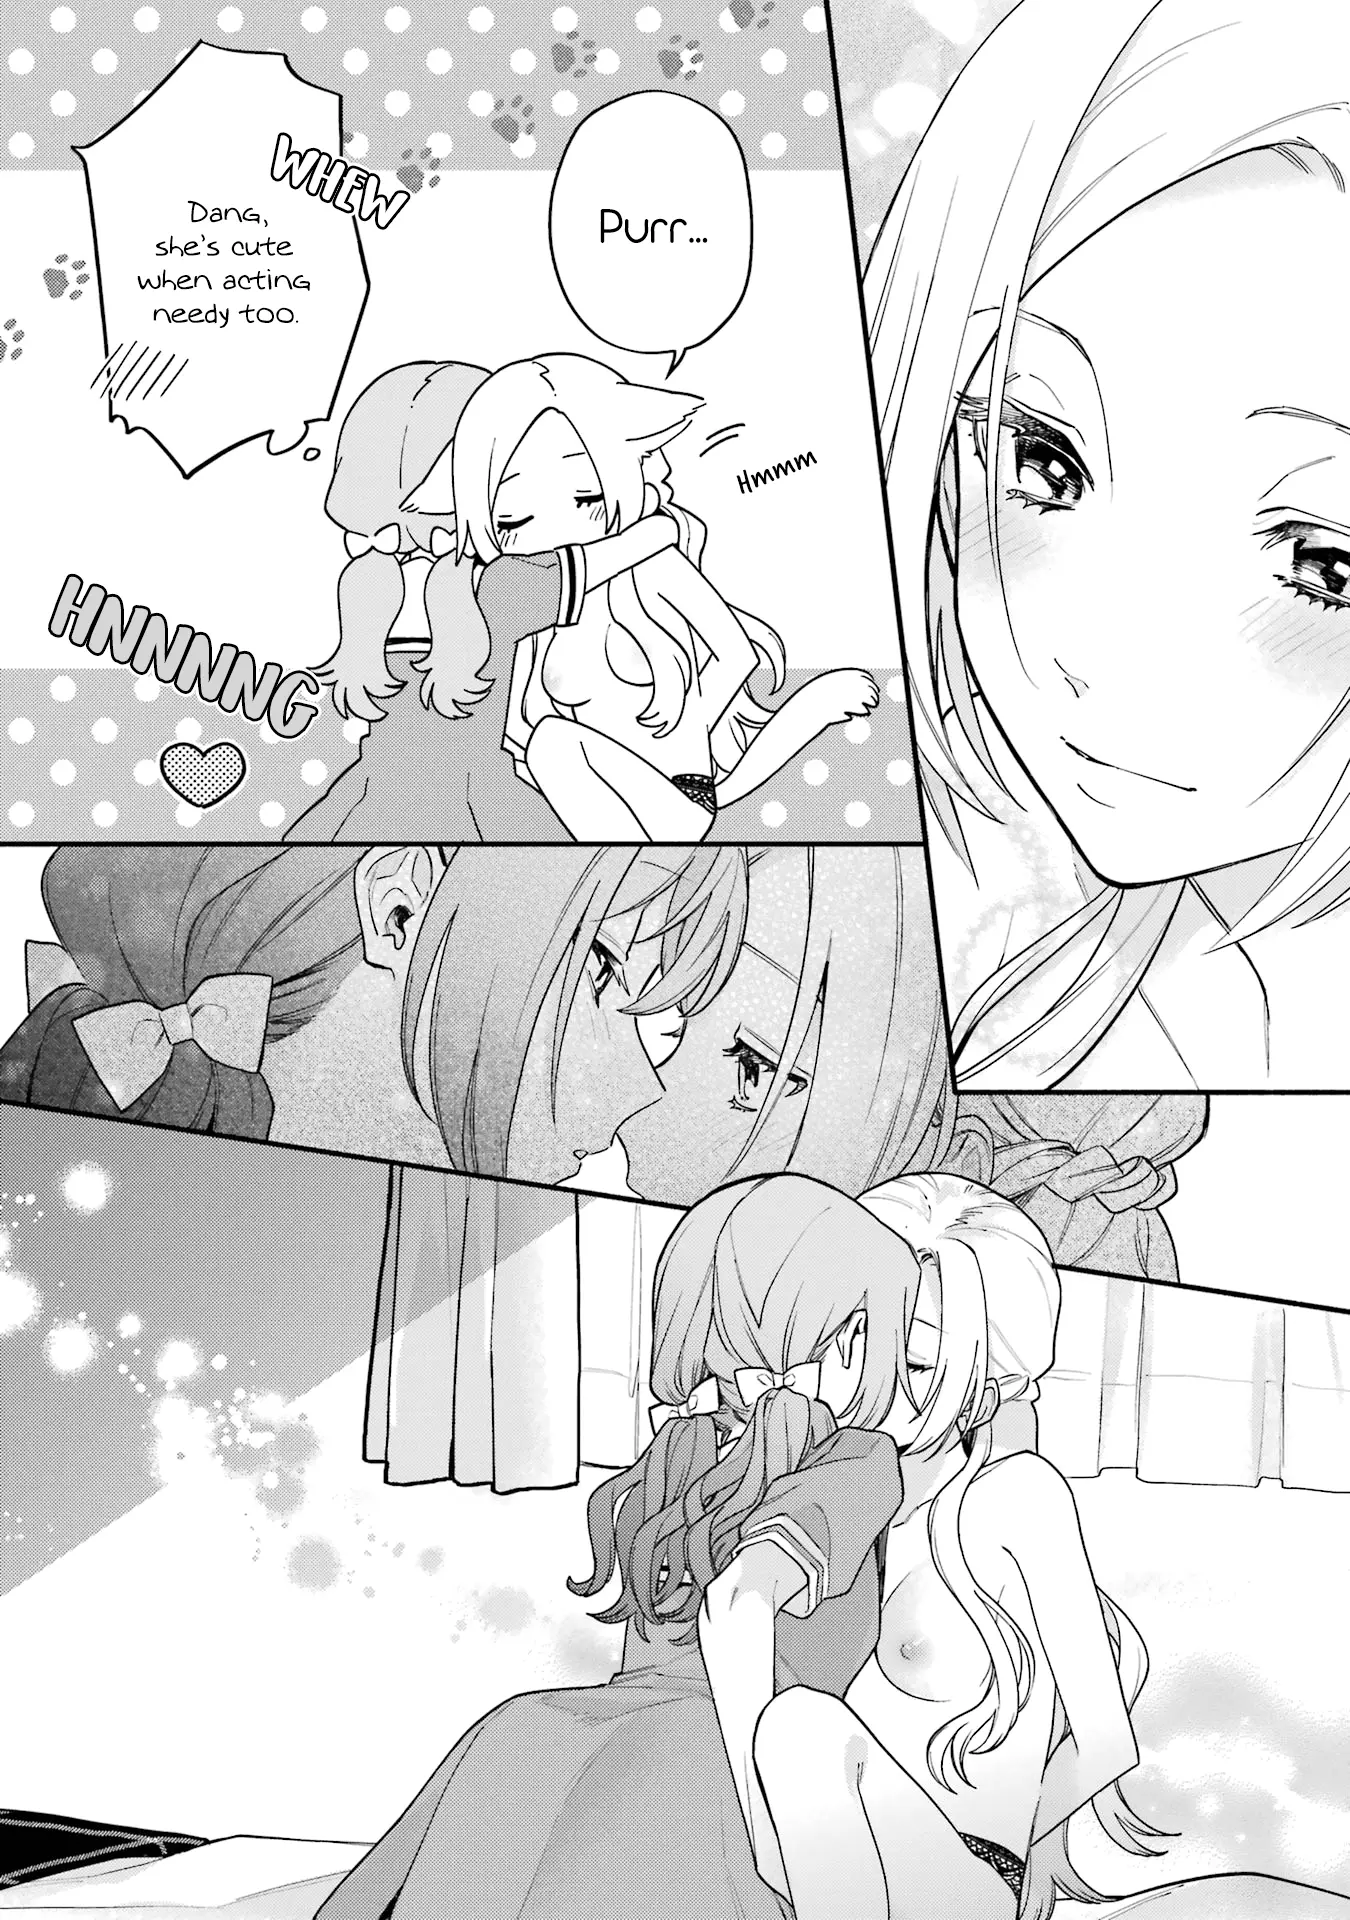 A Yuri Story About A Girl Who Insists "it's Impossible For Two Girls To Get Together" Completely Falling Within 100 Days - 15 page 28-7043b6d6